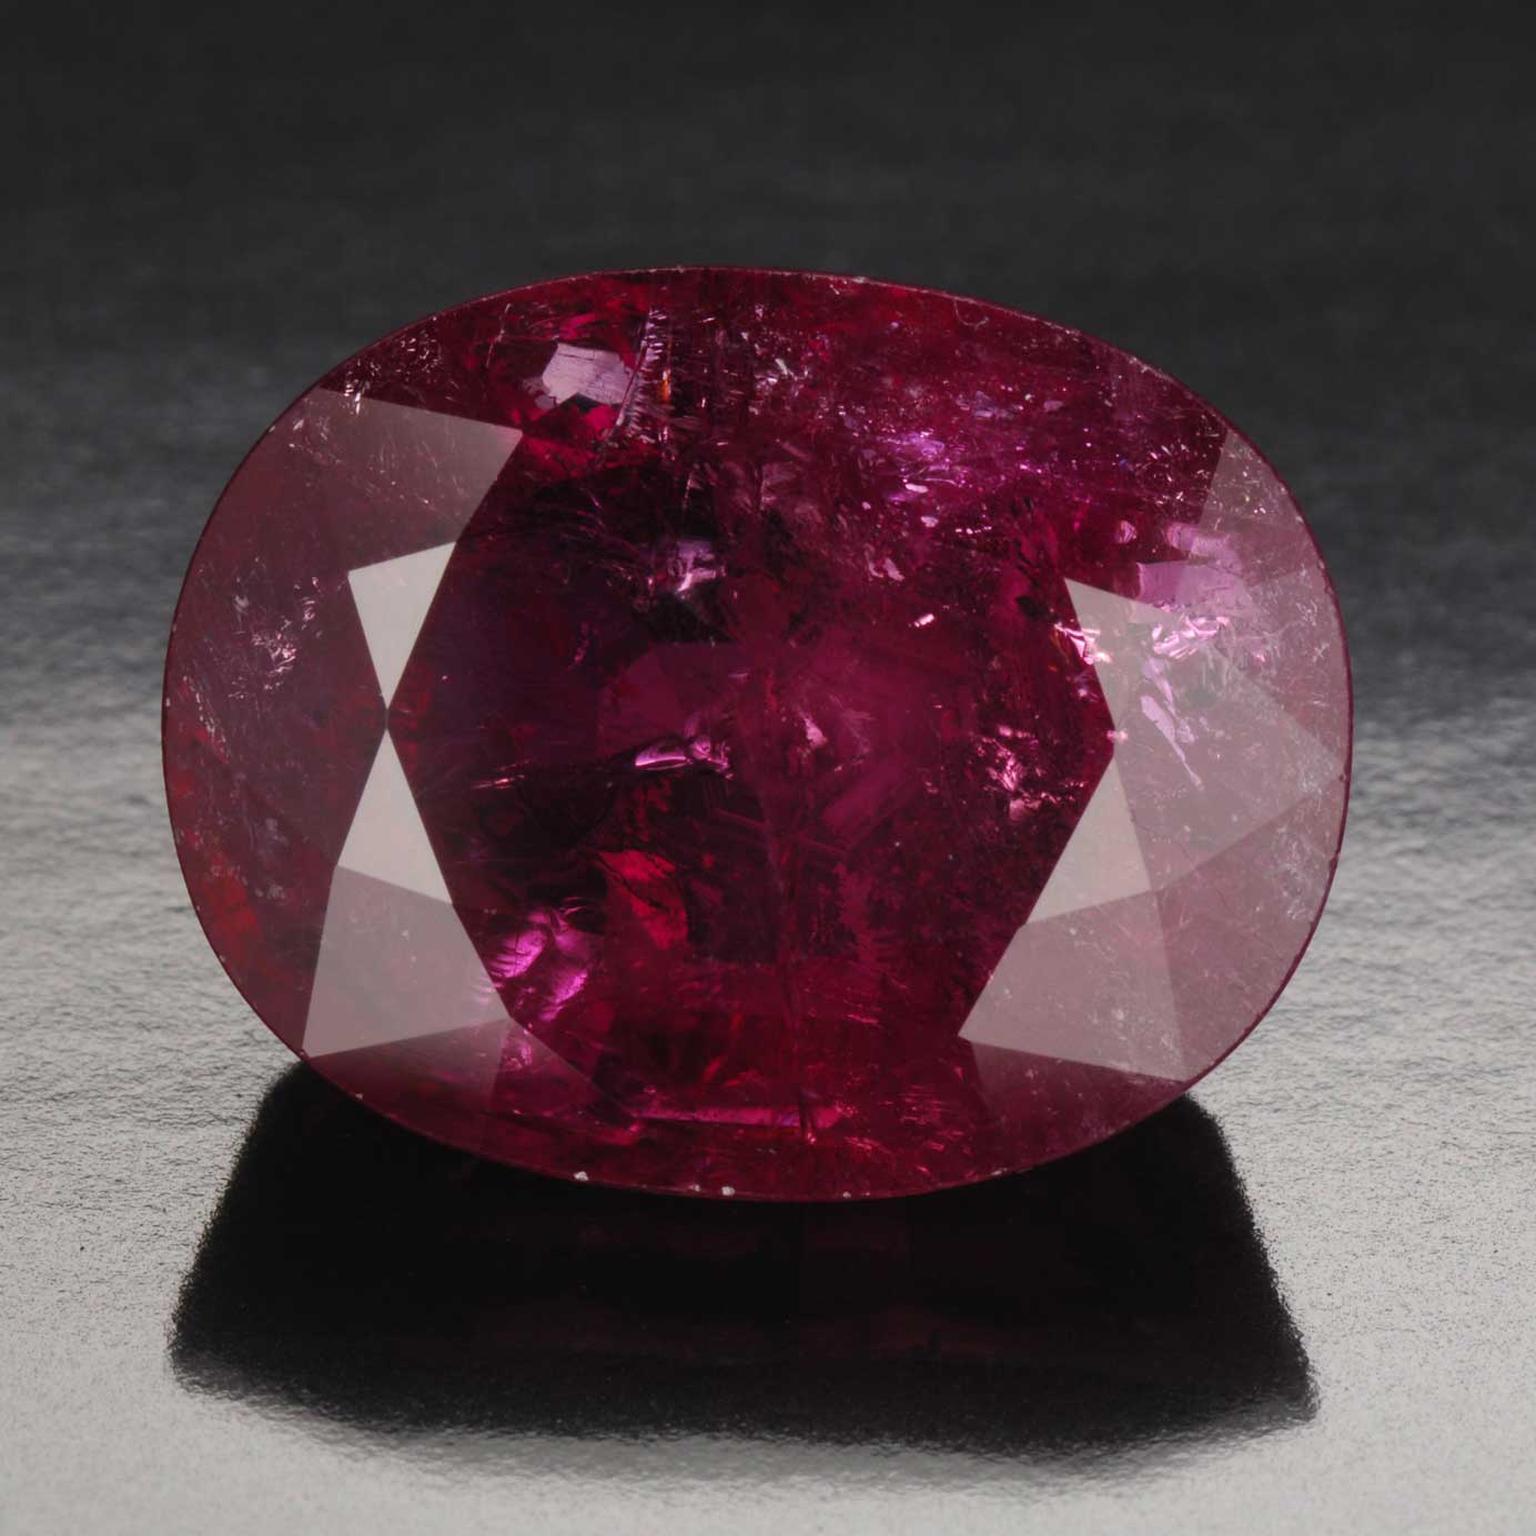 26 carat lead glass filled ruby Photo by Robert Weldon copyright GIA